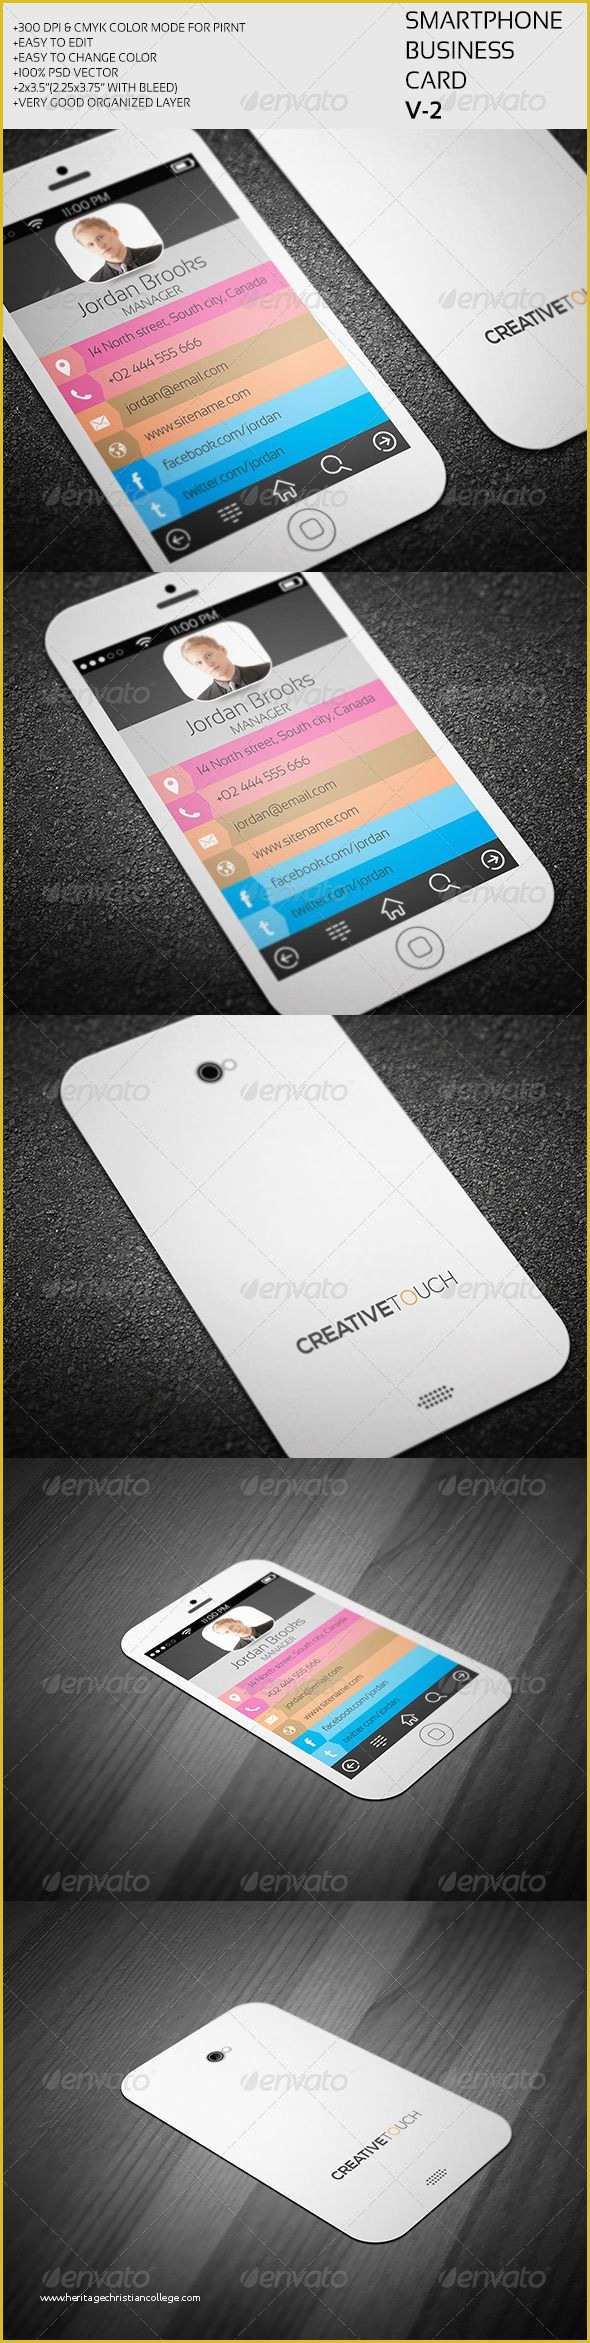 iPhone Business Card Template Free Of 12 Best Digital Business Card Images On Pinterest